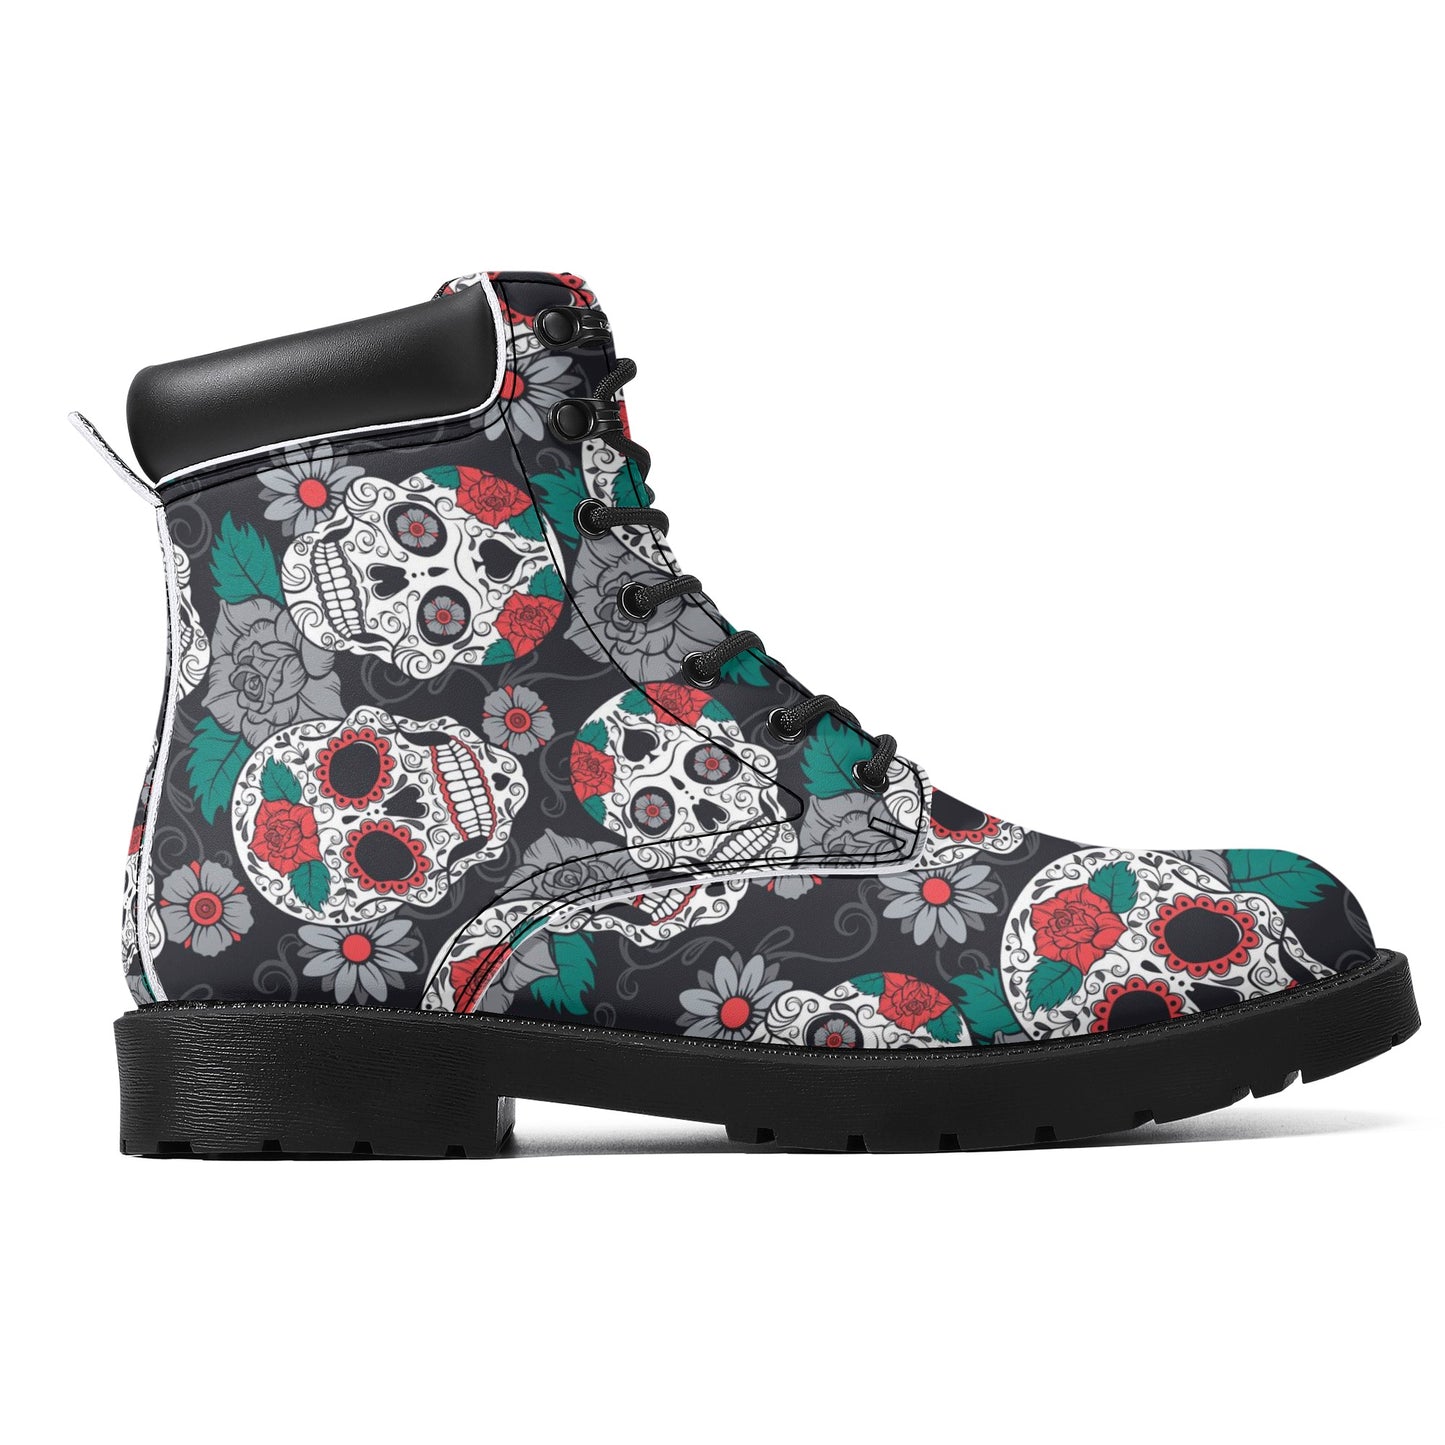 Sugar skull floral Women's All Season Leather Boots